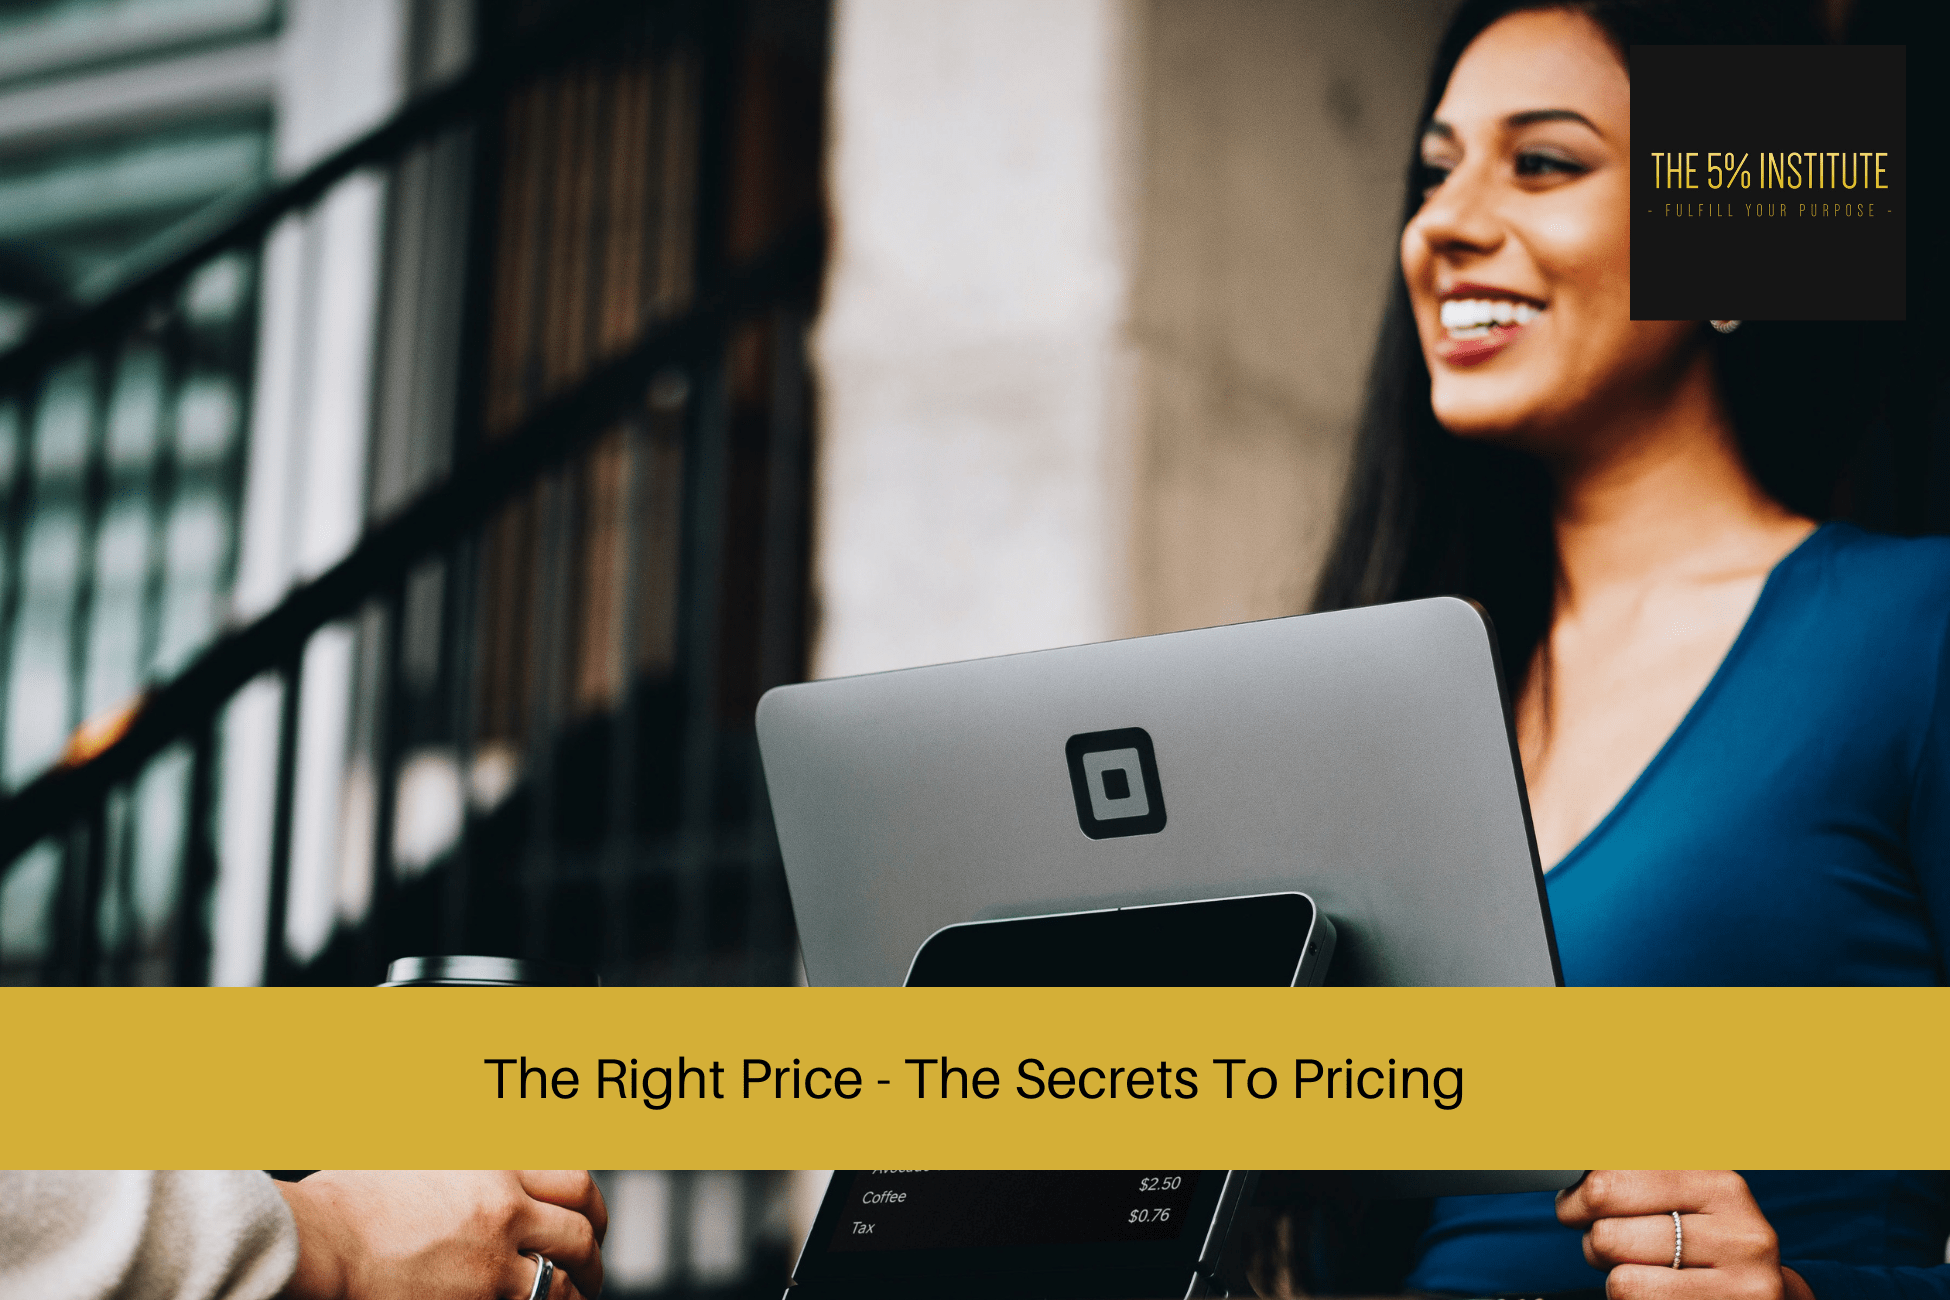 The Right Price - The Secrets To Pricing